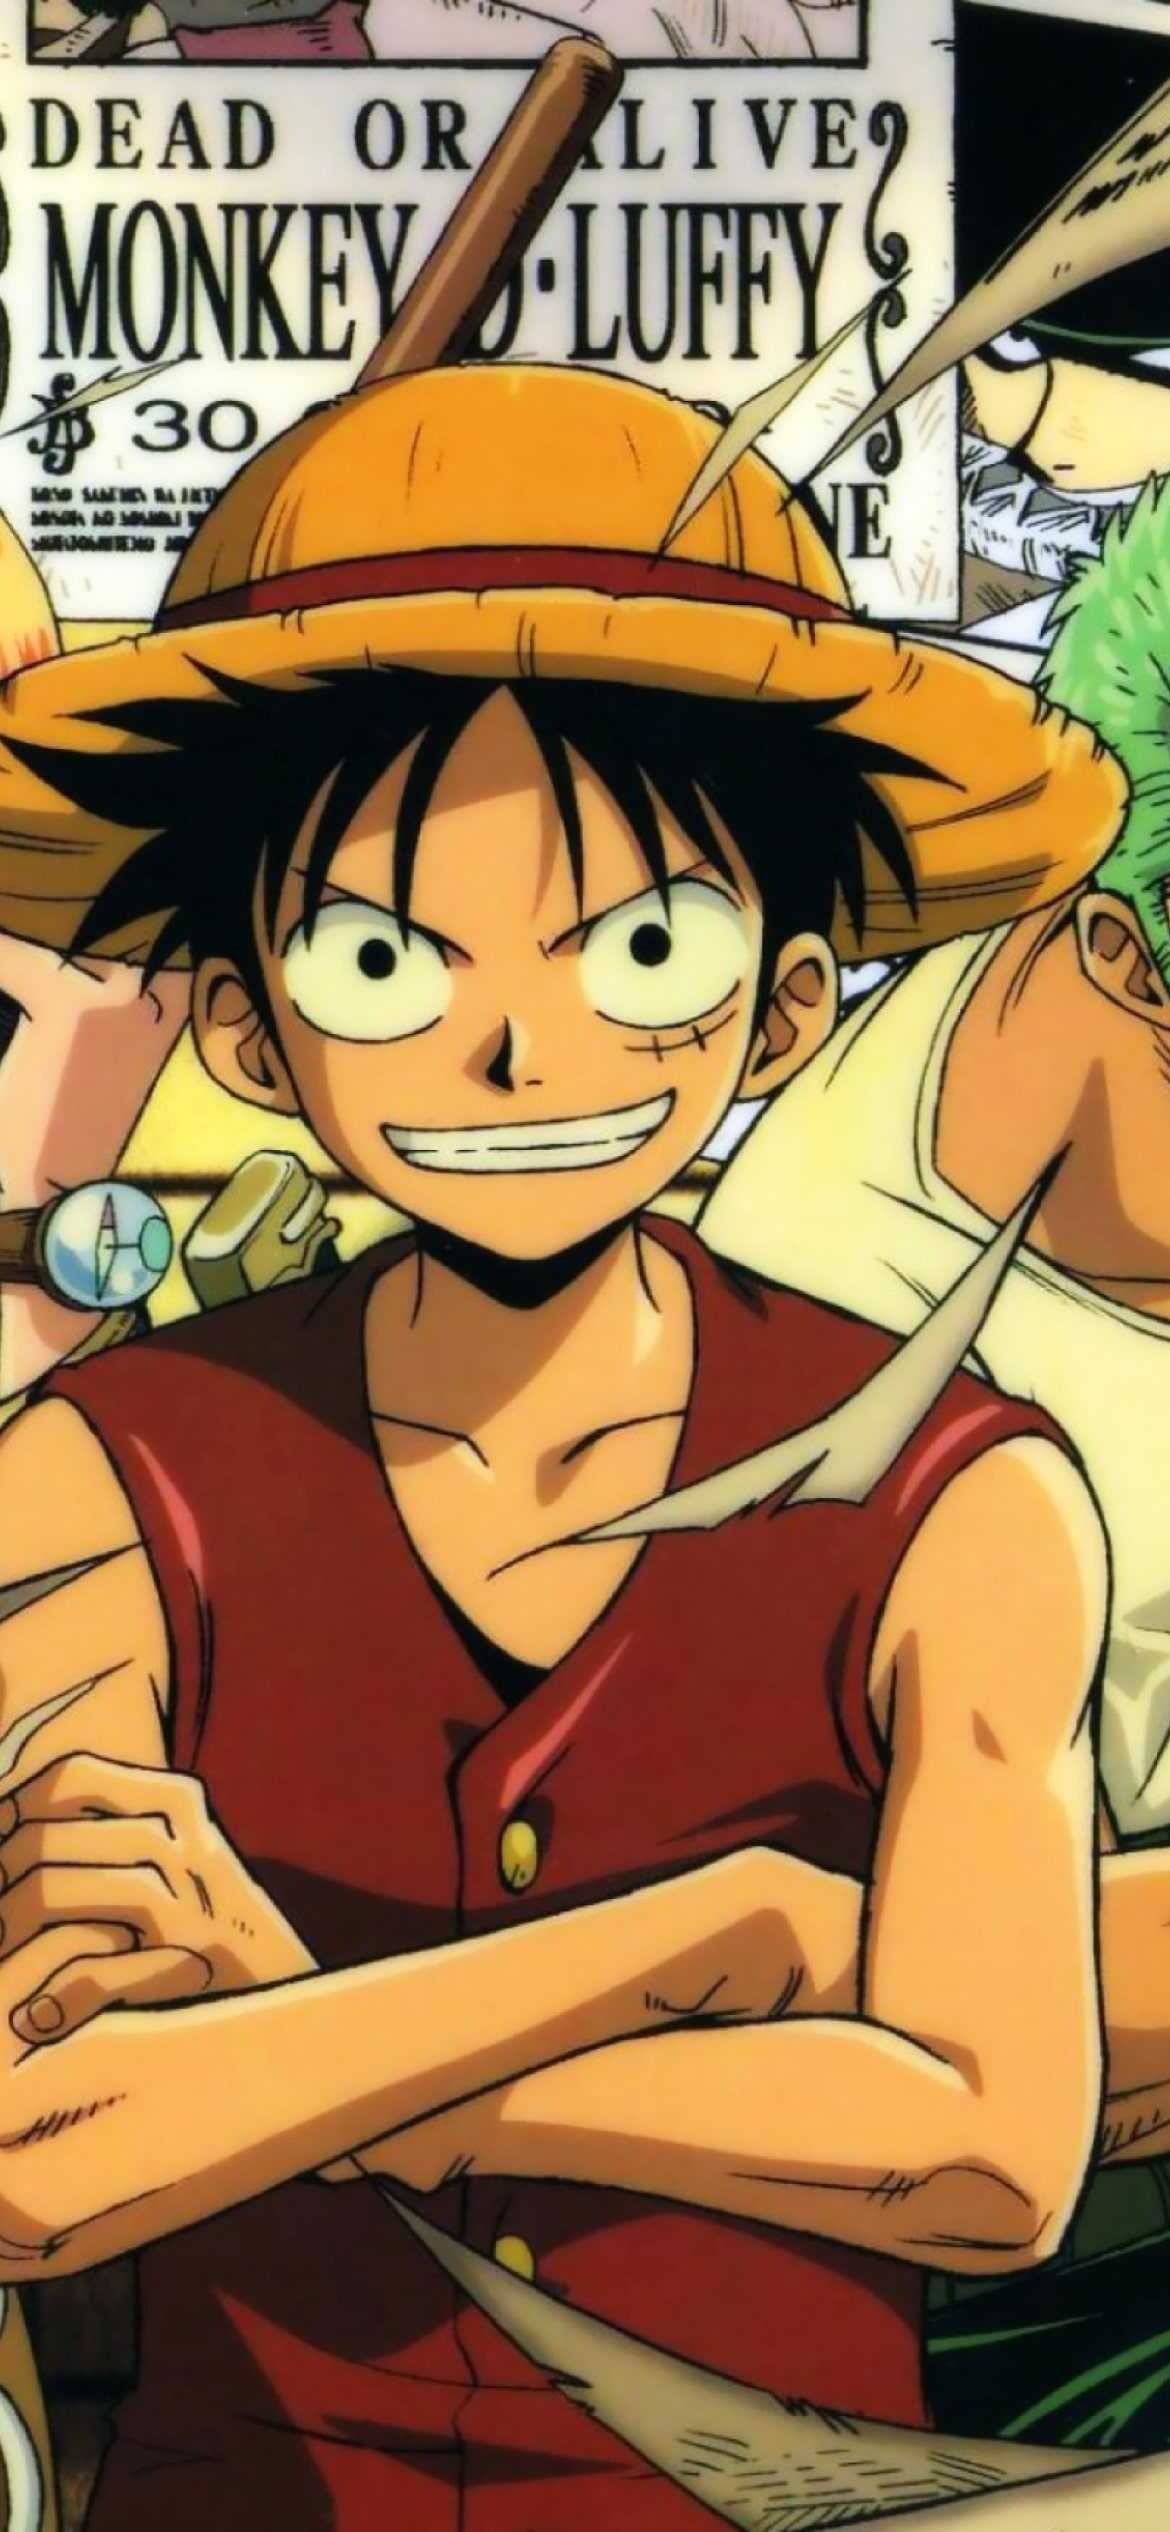 Luffy and the rest of the Straw Hat Pirates are the main characters of One Piece. - One Piece